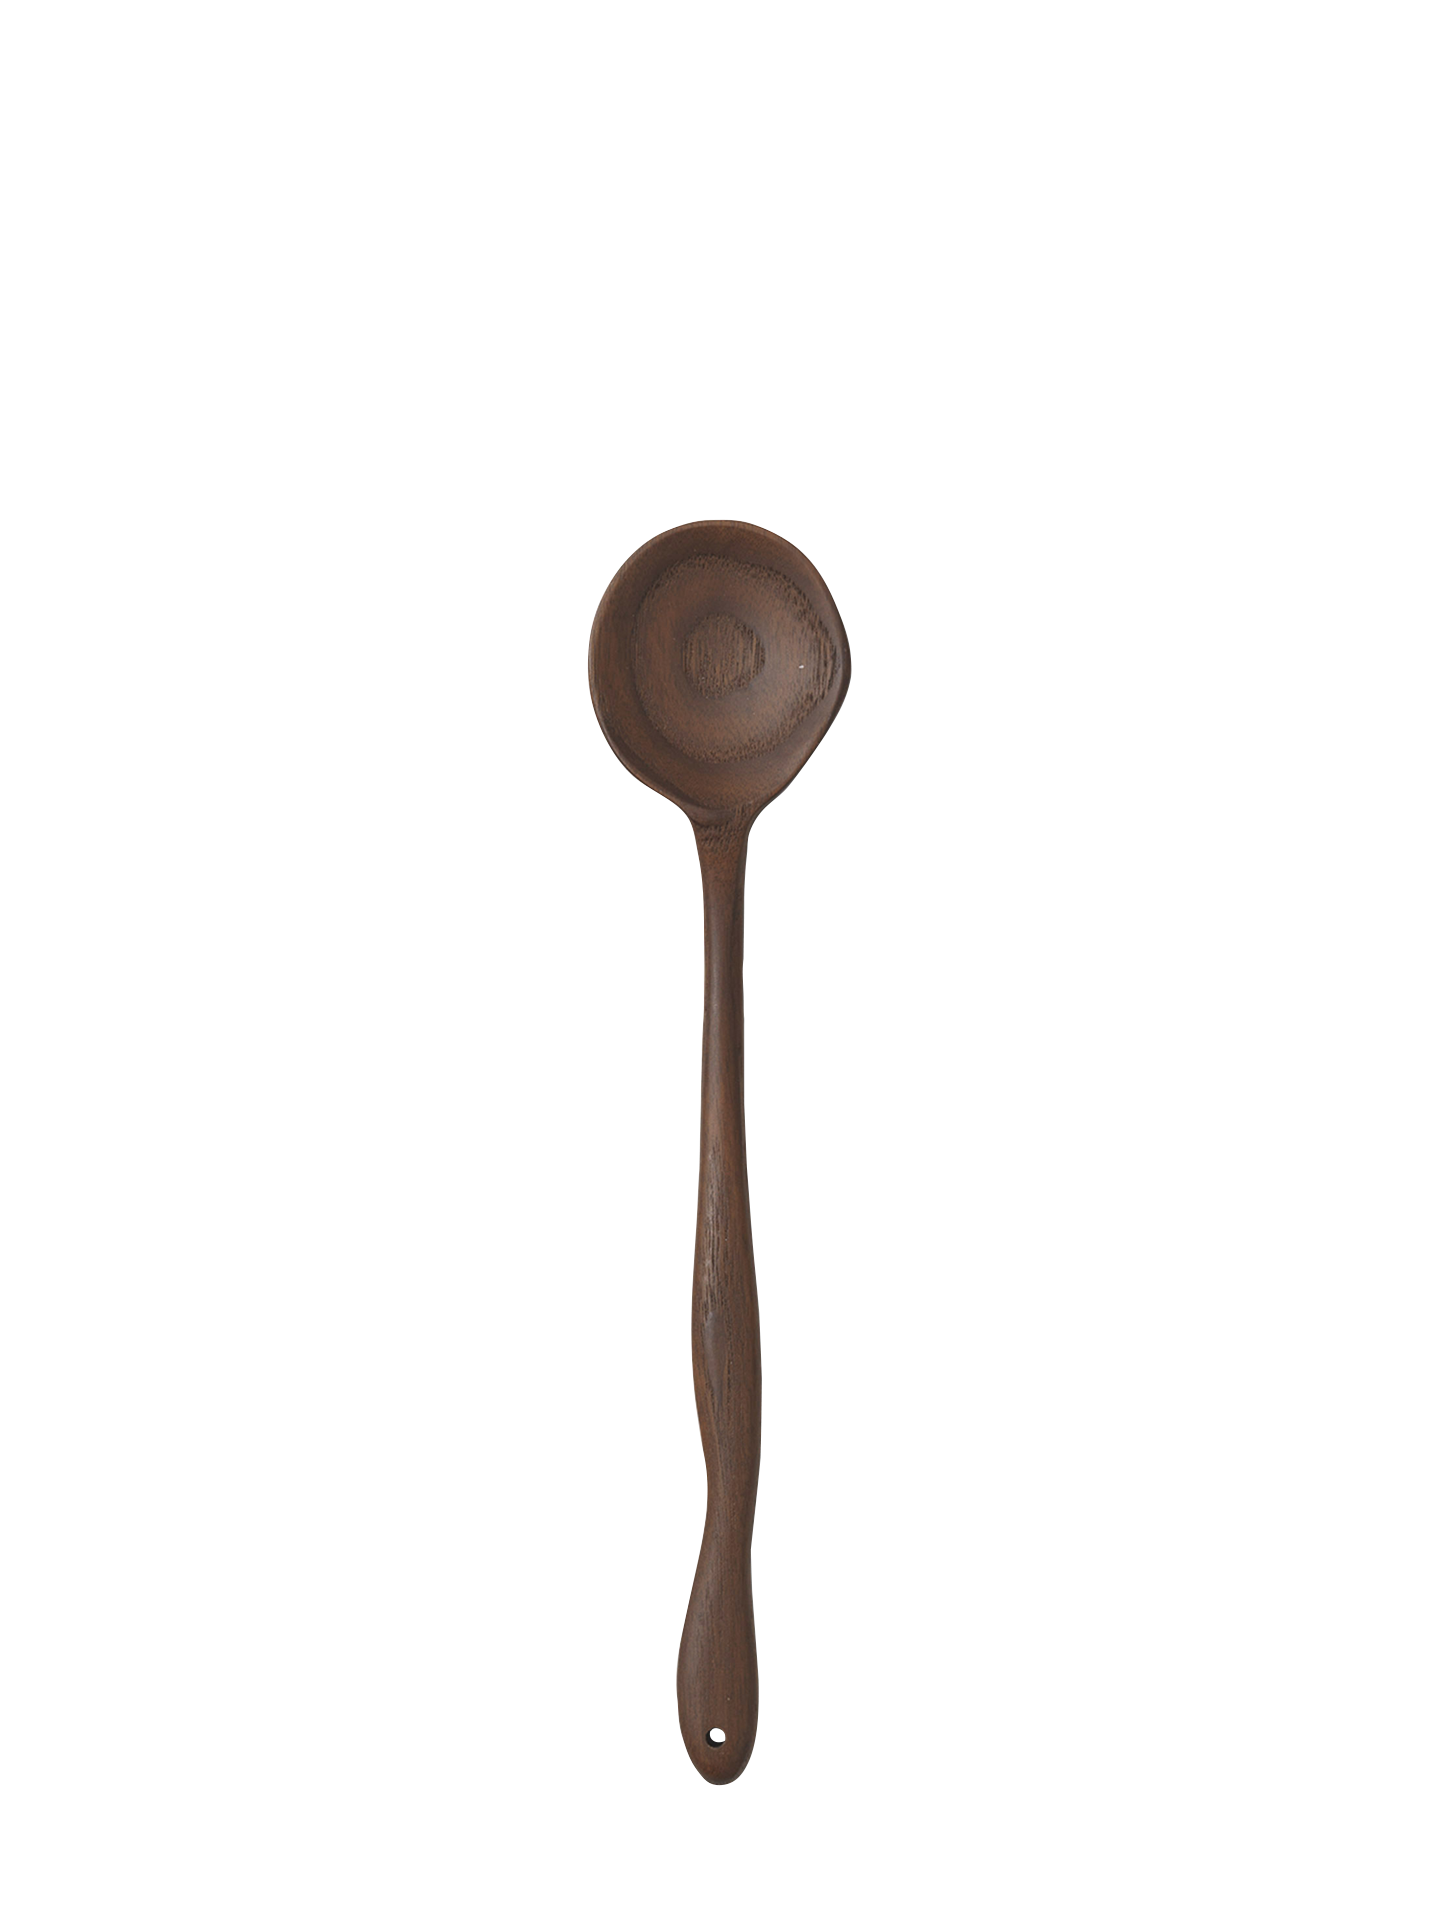 Meander spoon, 3 sizes